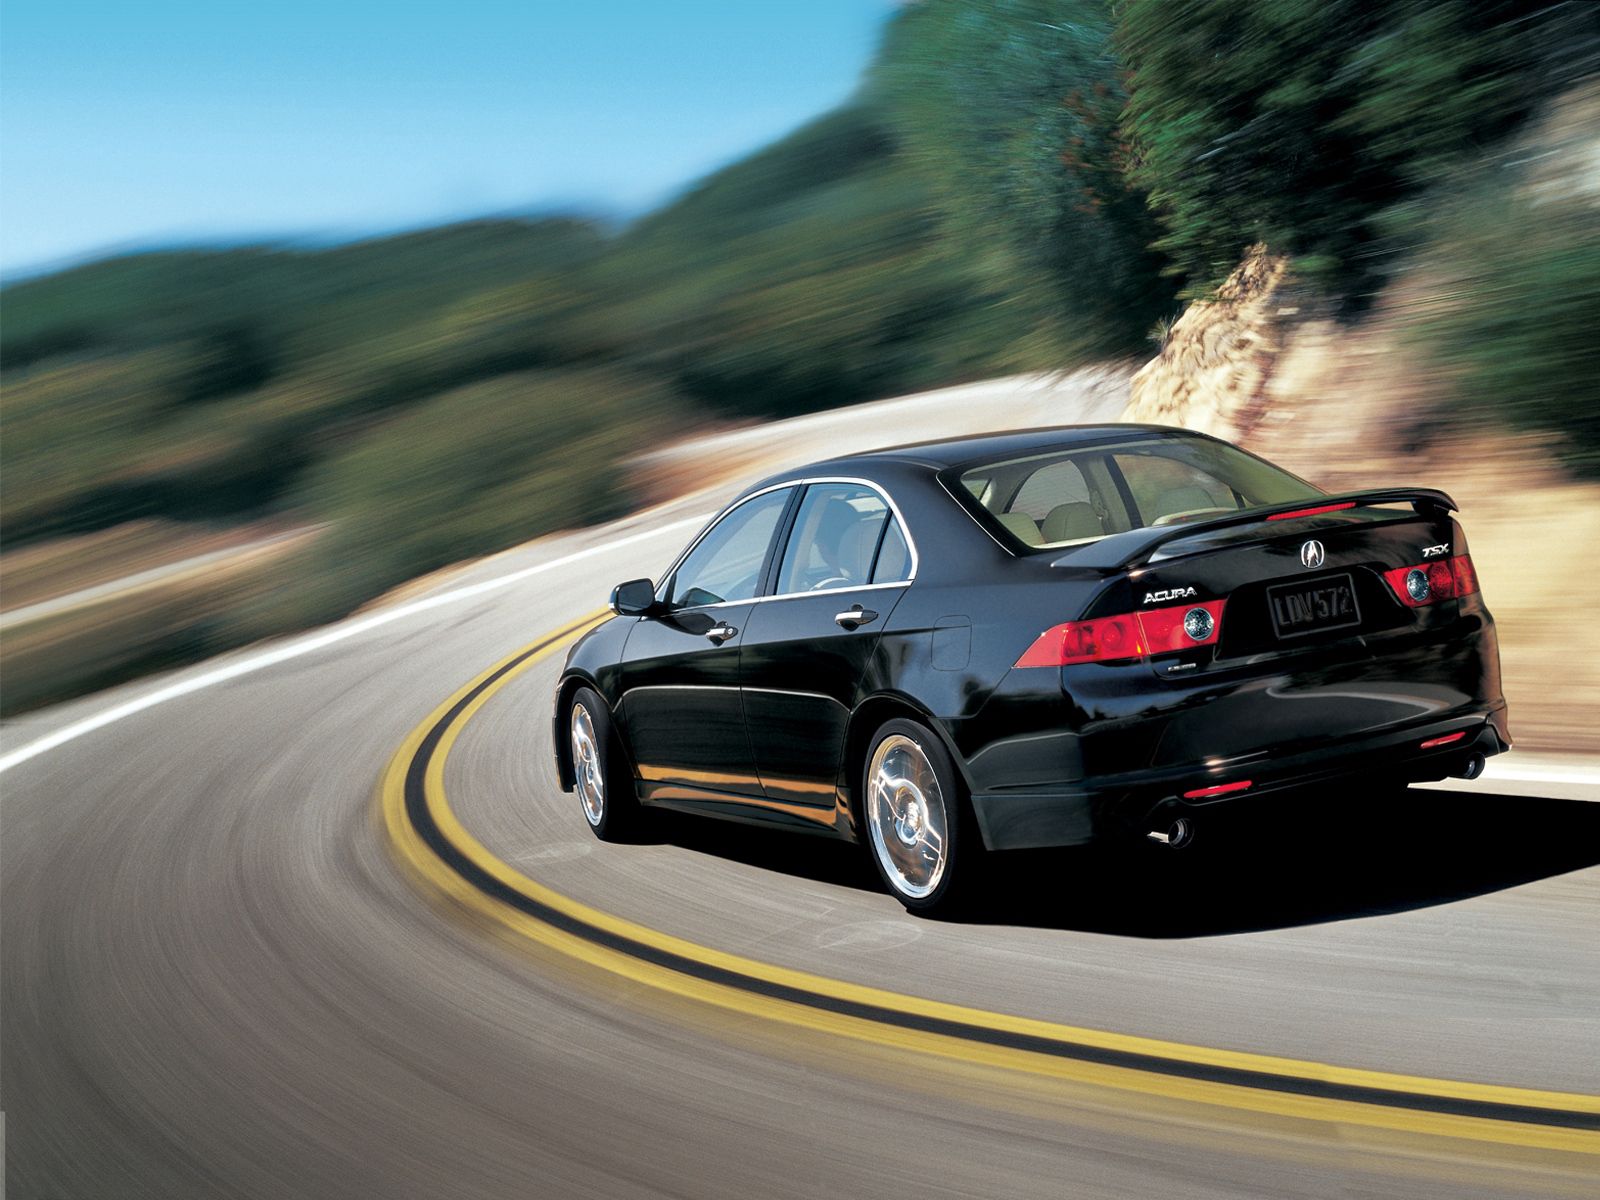 style, auto, nature, trees, acura, cars, black, asphalt, back view, rear view, speed, akura, 2006, tsx iphone wallpaper